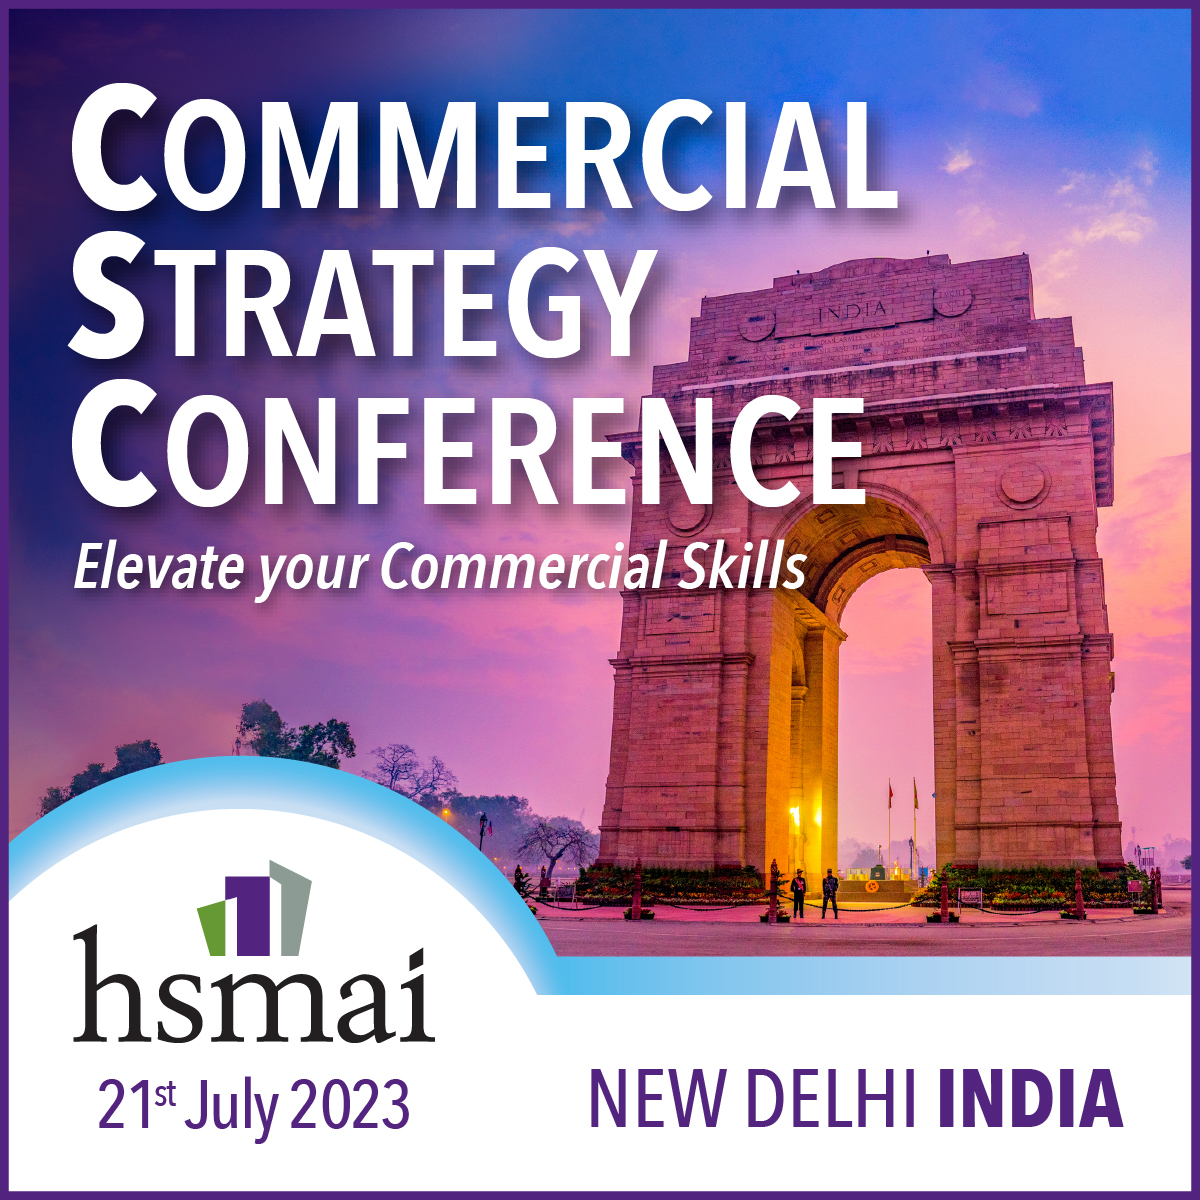 HSMAI Commercial Strategy Events 2023